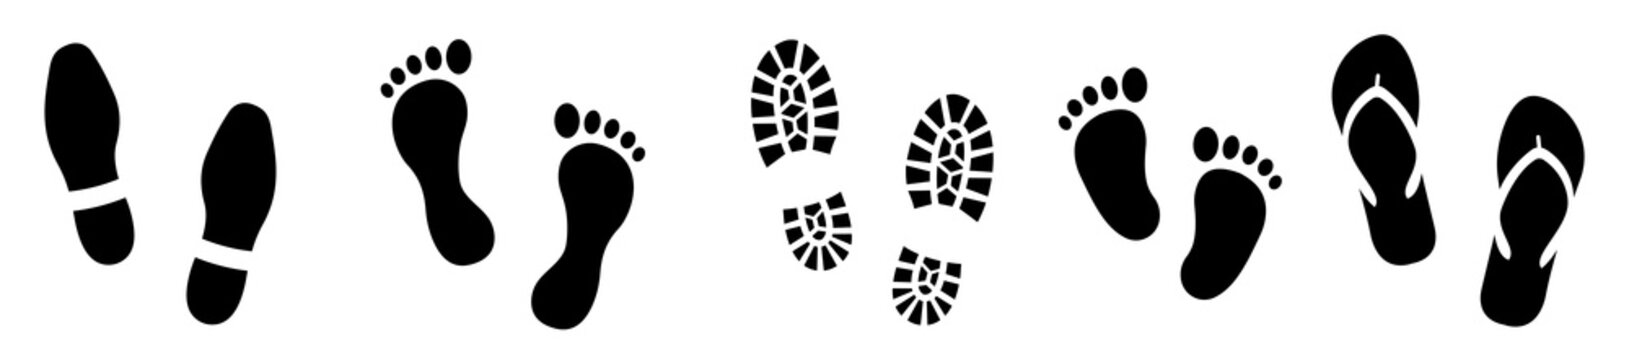 Different human footprints collection. Set human footprints . Baby footprint. Shoes for children and adults.Flat linear design. Black silhouettes isolated.Vector illustration